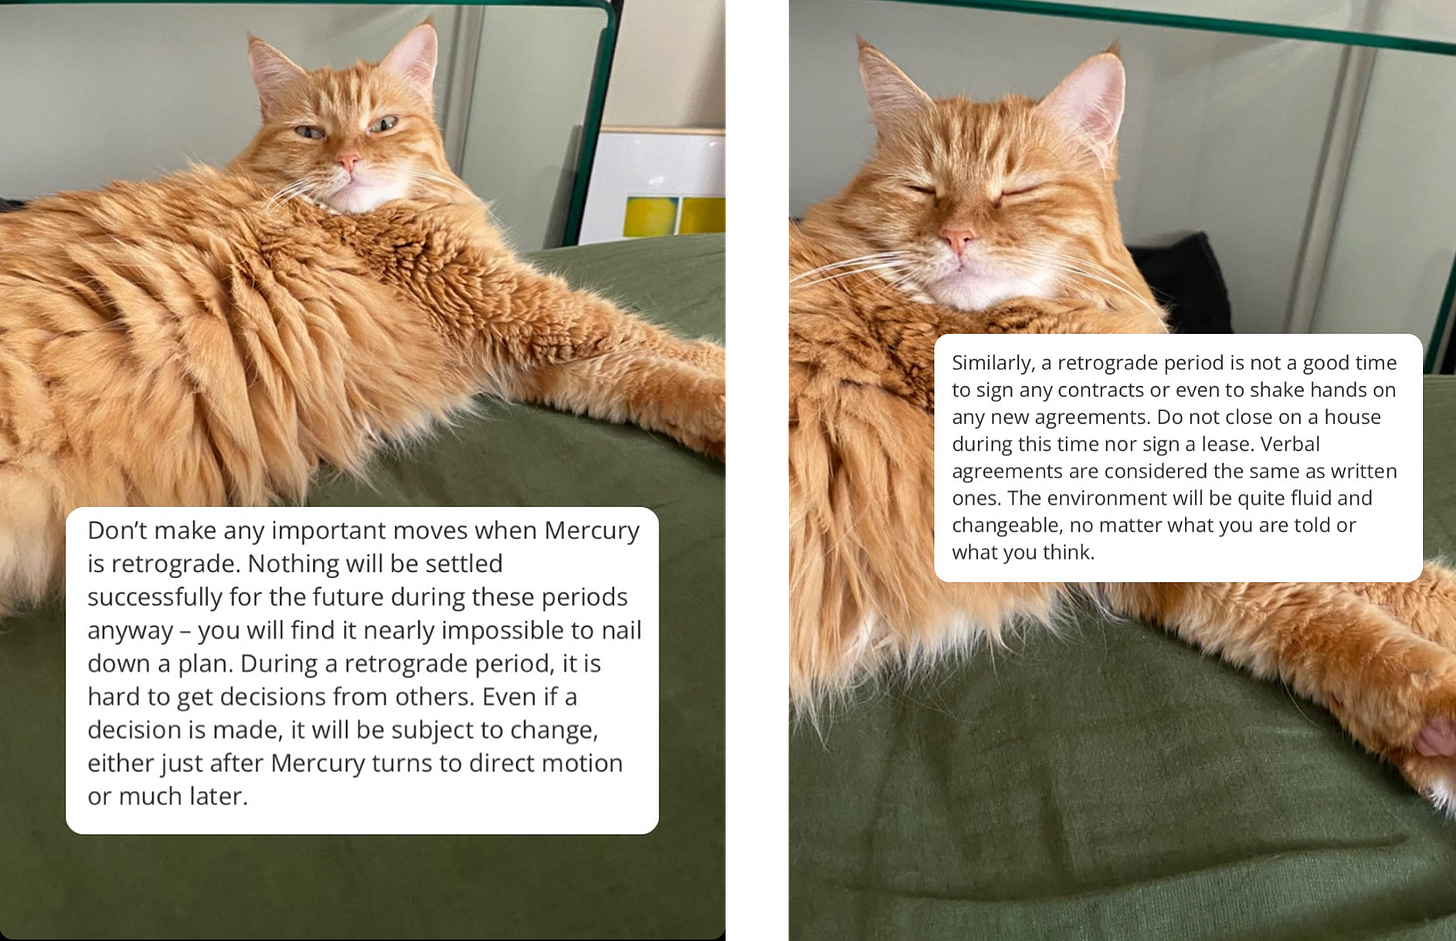 Two photographs of a fluffy orange cat lying down on a bed. There is a block of white on each photograph with black text. The left photograph reads “Don’t make any important moves when Mercury is retrograde. Nothing will be settled successfully for the future during these periods anyway - you will find it nearly impossible to nail down a plan. During a retrograde period, it is hard to get decisions from others. Even if a decision is made, it will be subject to change, either just after Mercury turns to direct motion or much later.” The text on the right reads: “similarly, a retrograde period is not a good time to sign any contracts or even to shake hands on any new agreements. Do not close on a house during this time nor sign a lease. Verbal agreements are considered the same as written ones. The environment will be quite fluid and changeable, no matter what you are told or what you think.” 